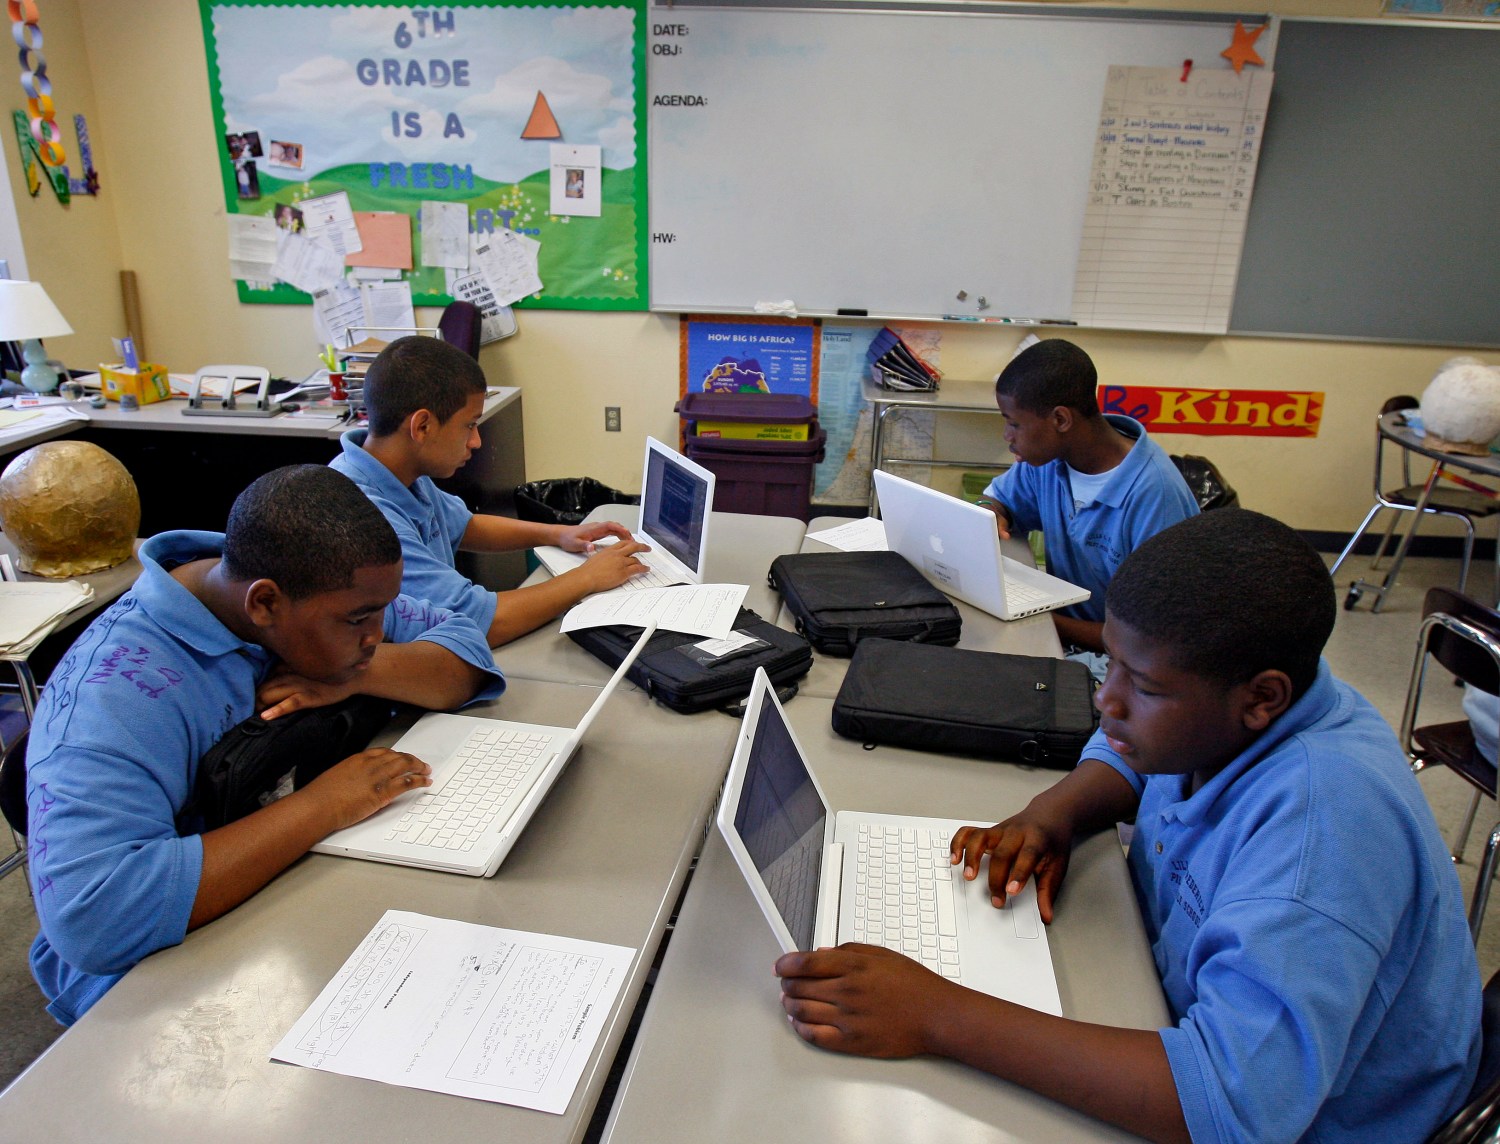 Students at the Lilla G. Frederick Pilot Middle School use their laptops during a class in Dorchester, Massachusetts June 20, 2008. From online courses to kid-friendly laptops and virtual teachers, technology is spreading in America's classrooms, reducing the need for textbooks, notepads, paper and in some cases even the schools themselves.  To match feature USA-EDUCATION/TECHNOLOGY  REUTERS/Adam Hunger  (UNITED STATES) - GM1E4770O4801